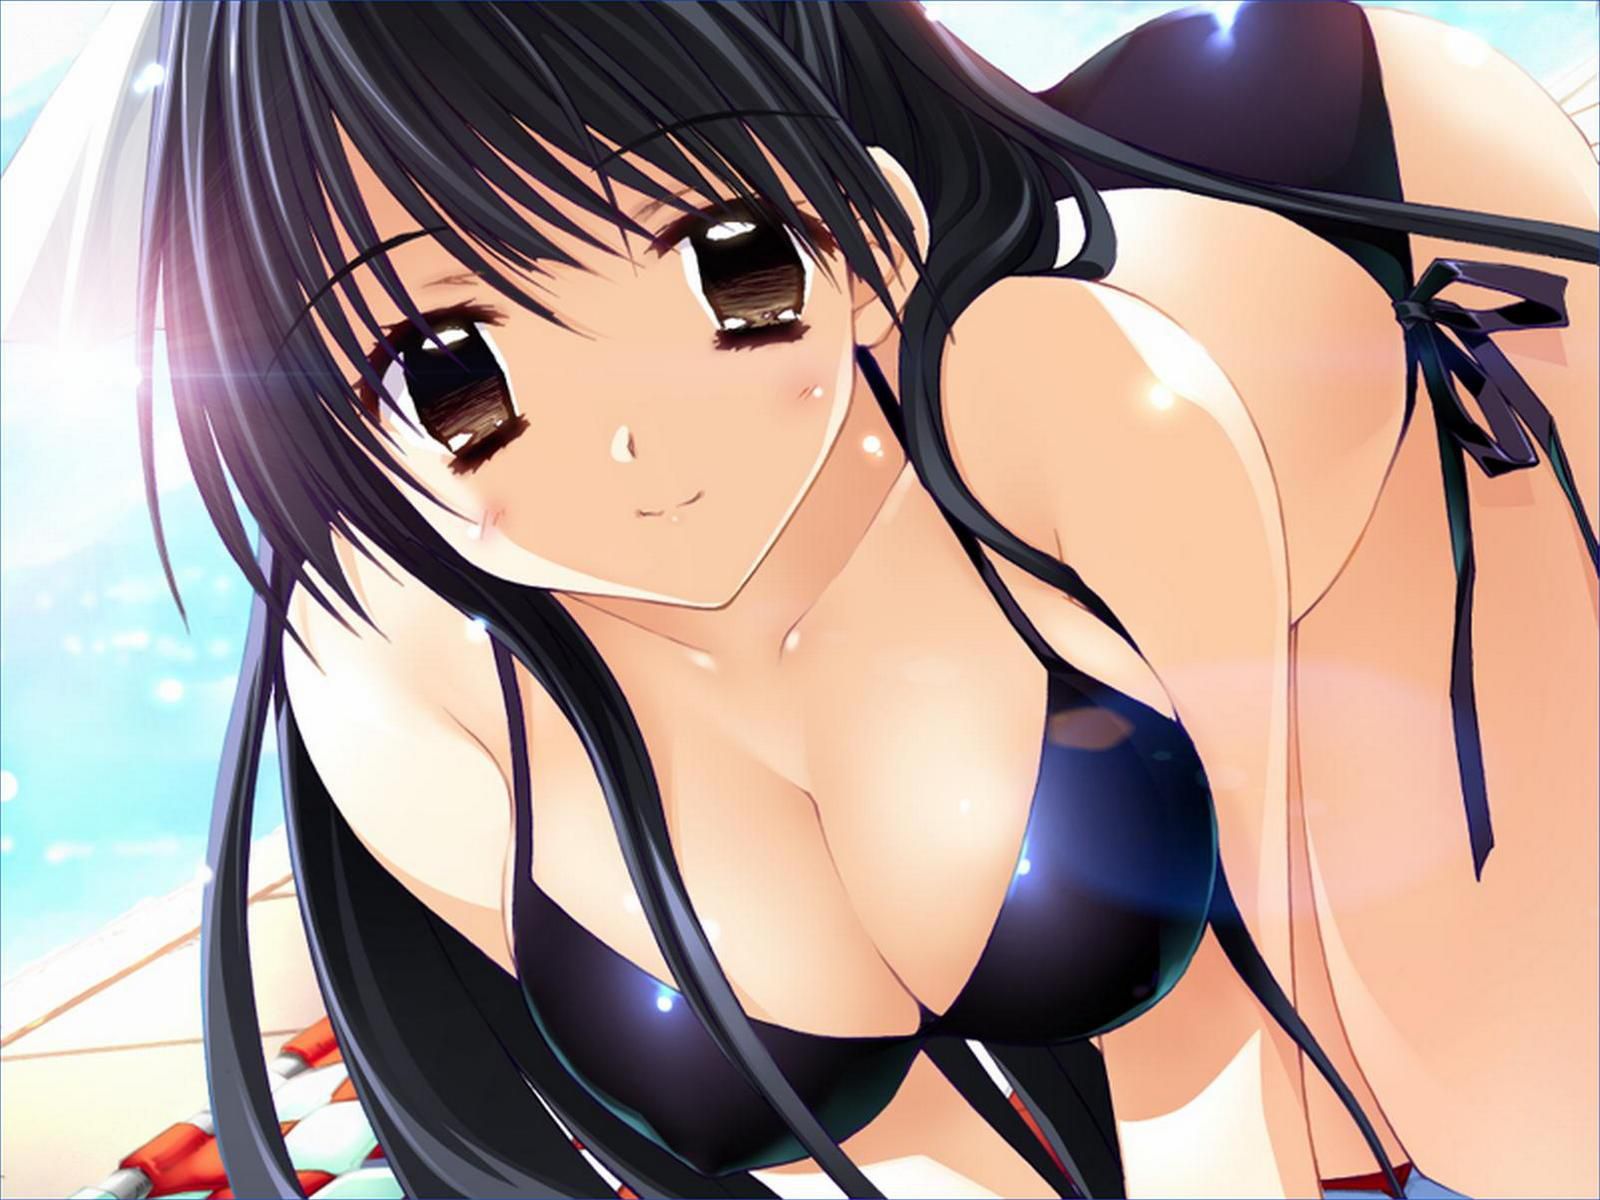 Will continue summer swimsuit pictures 13